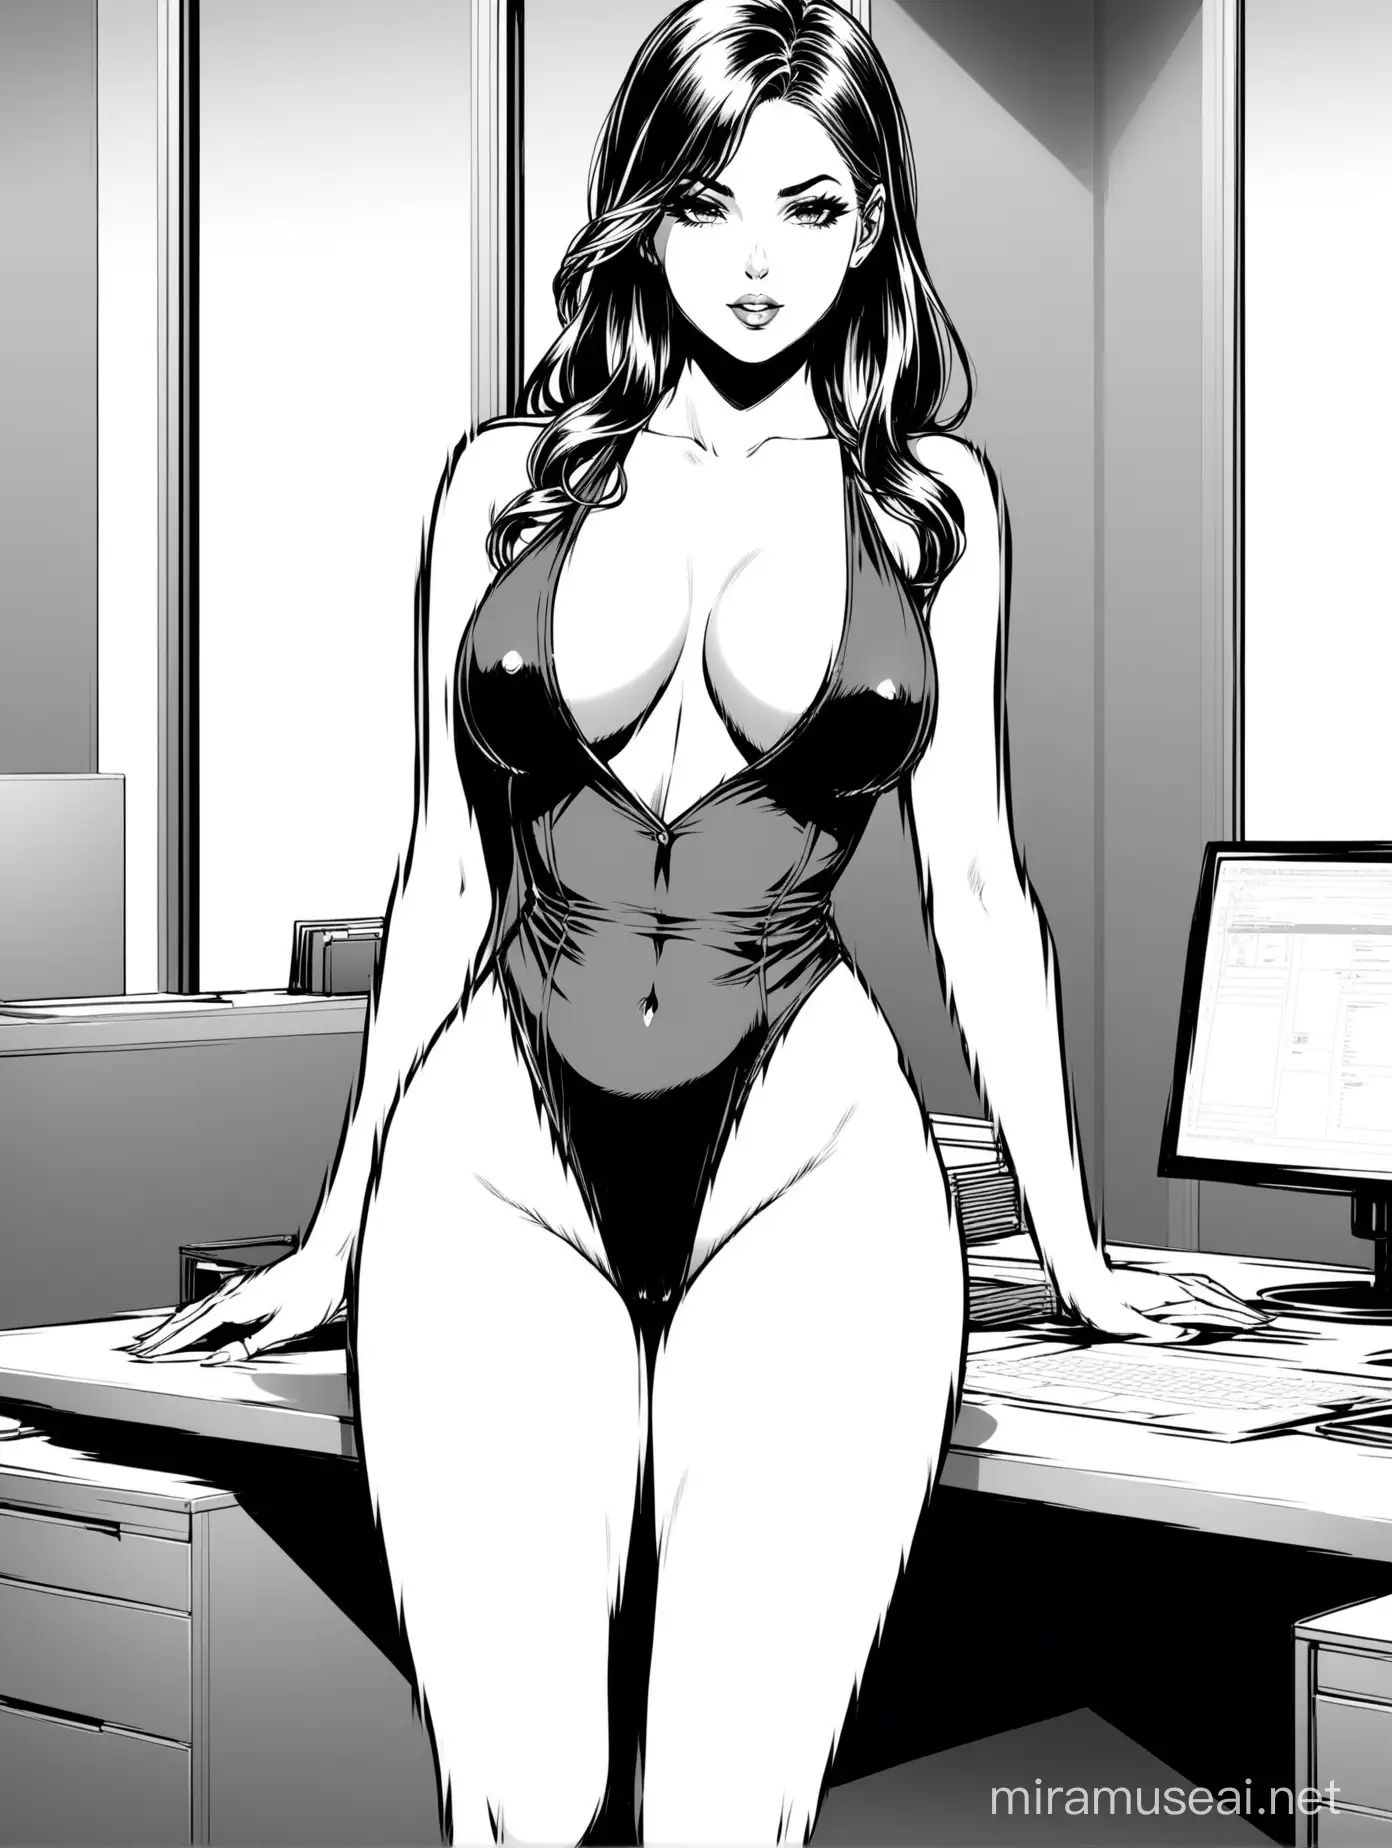 A black and white coloring page of a Seductive Office Girl wearing a revealing outfit, in a sexy pose in office room